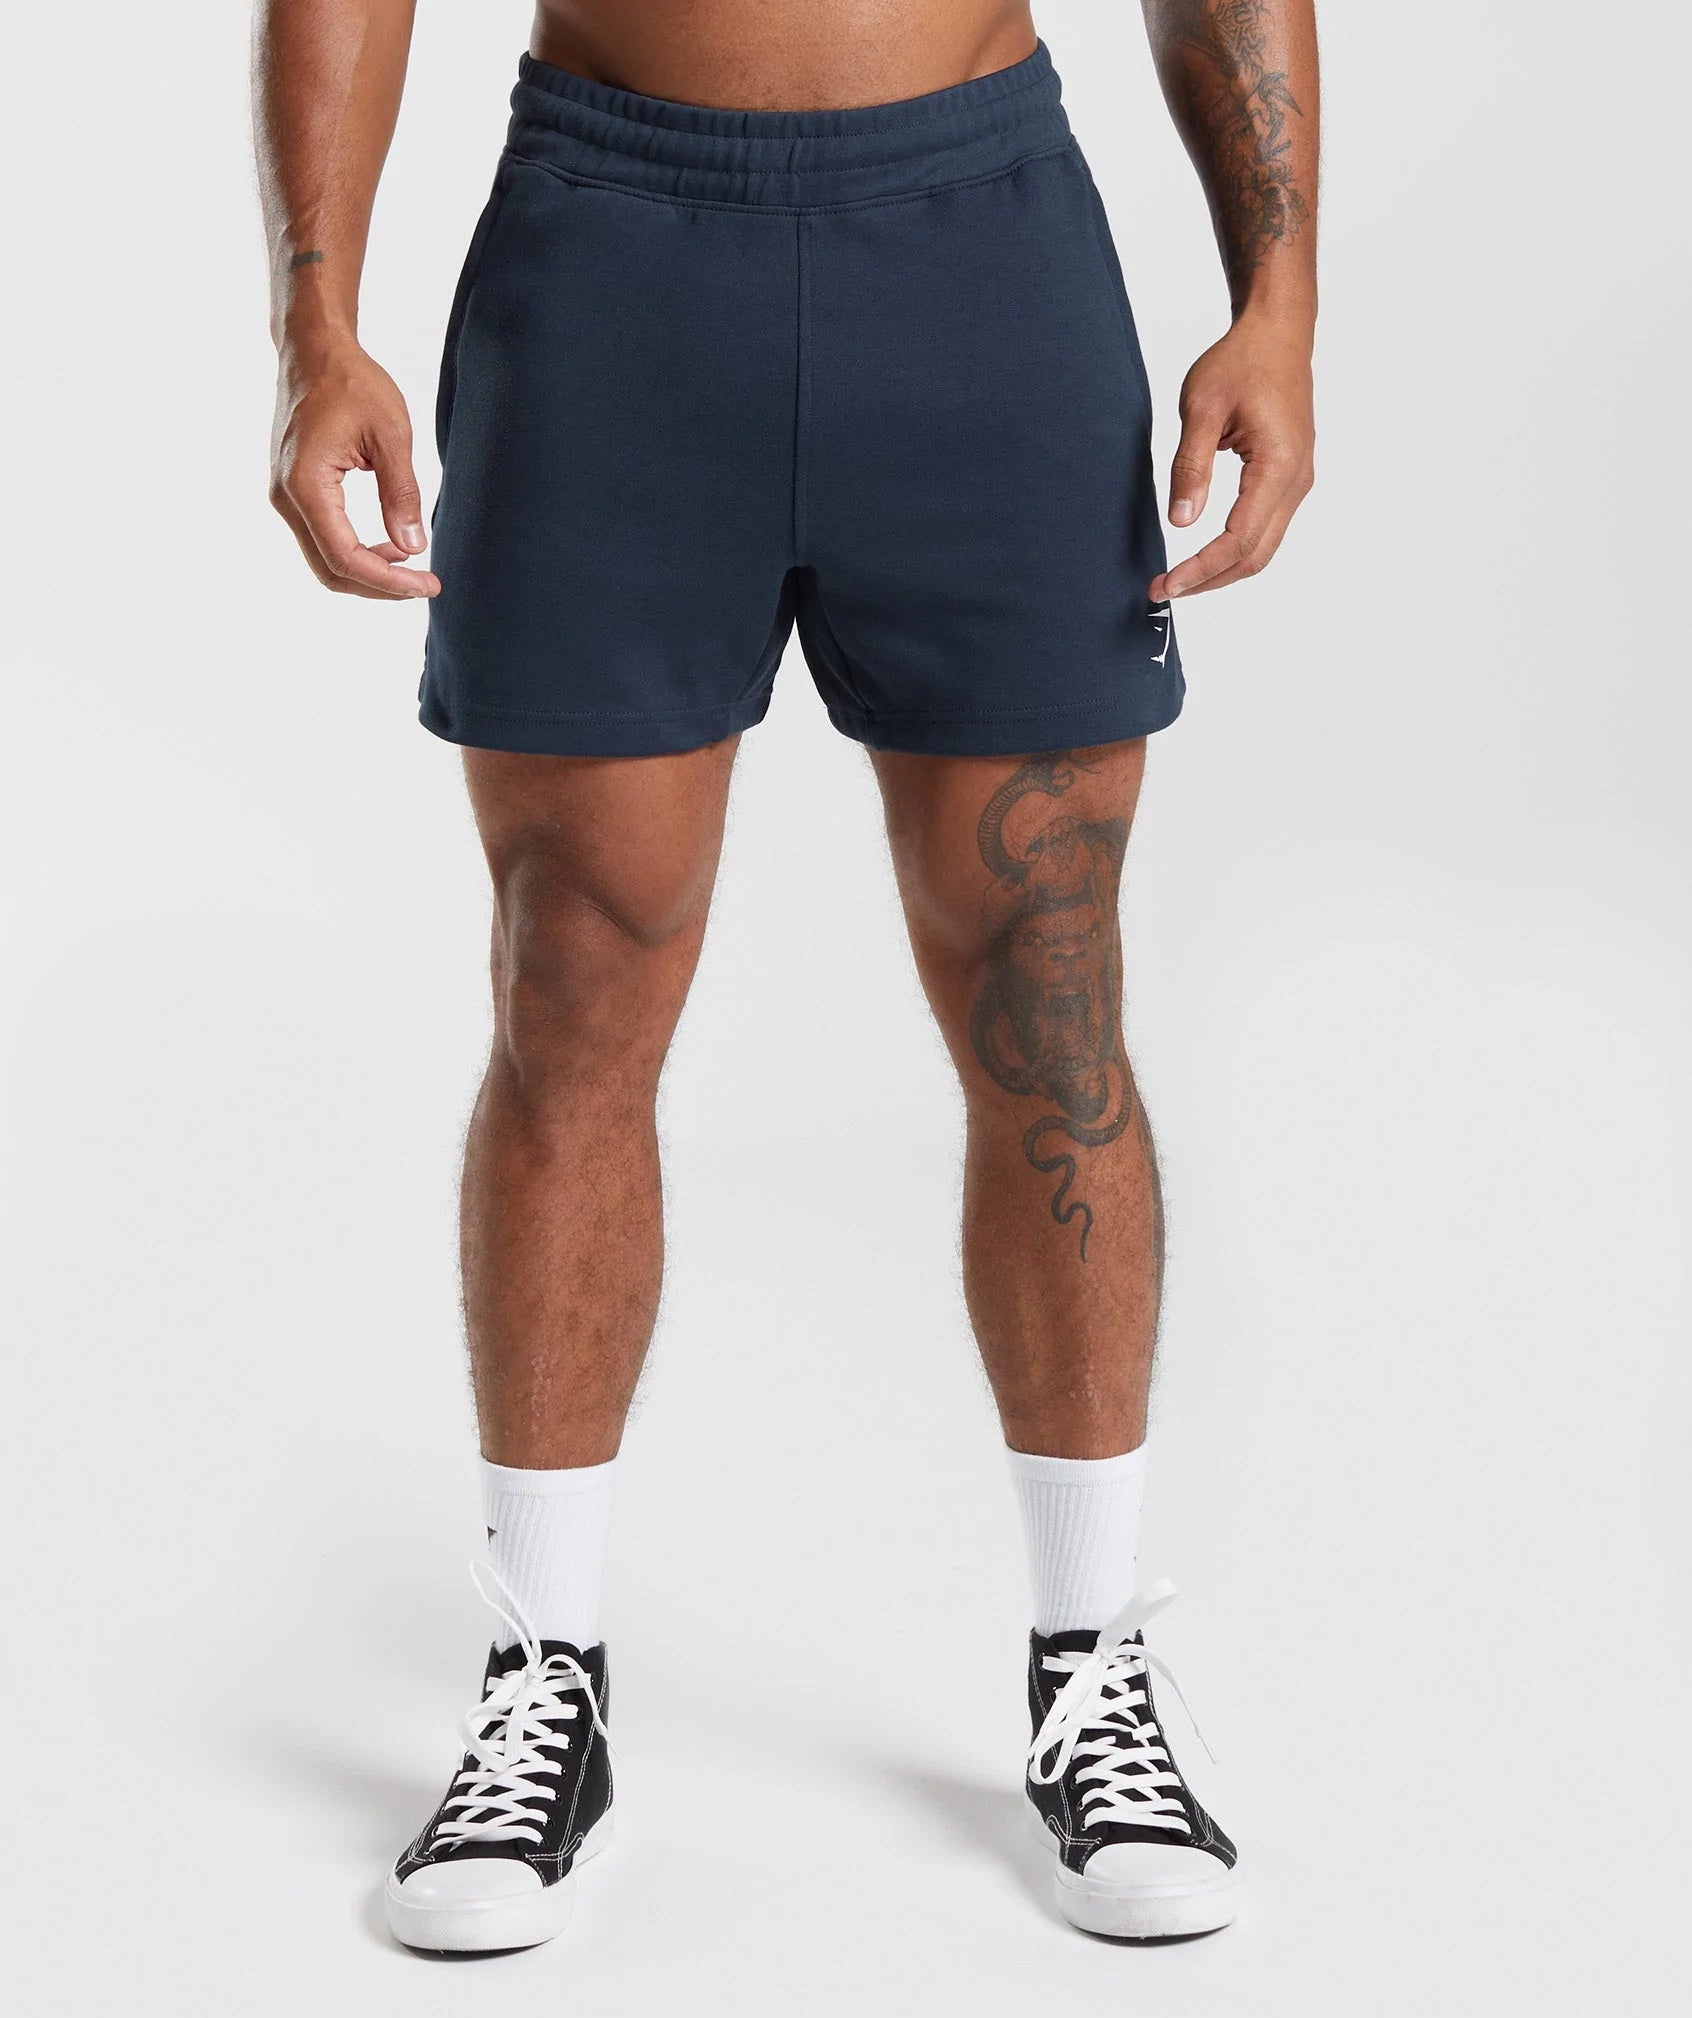 React 5" Shorts in Navy - view 1